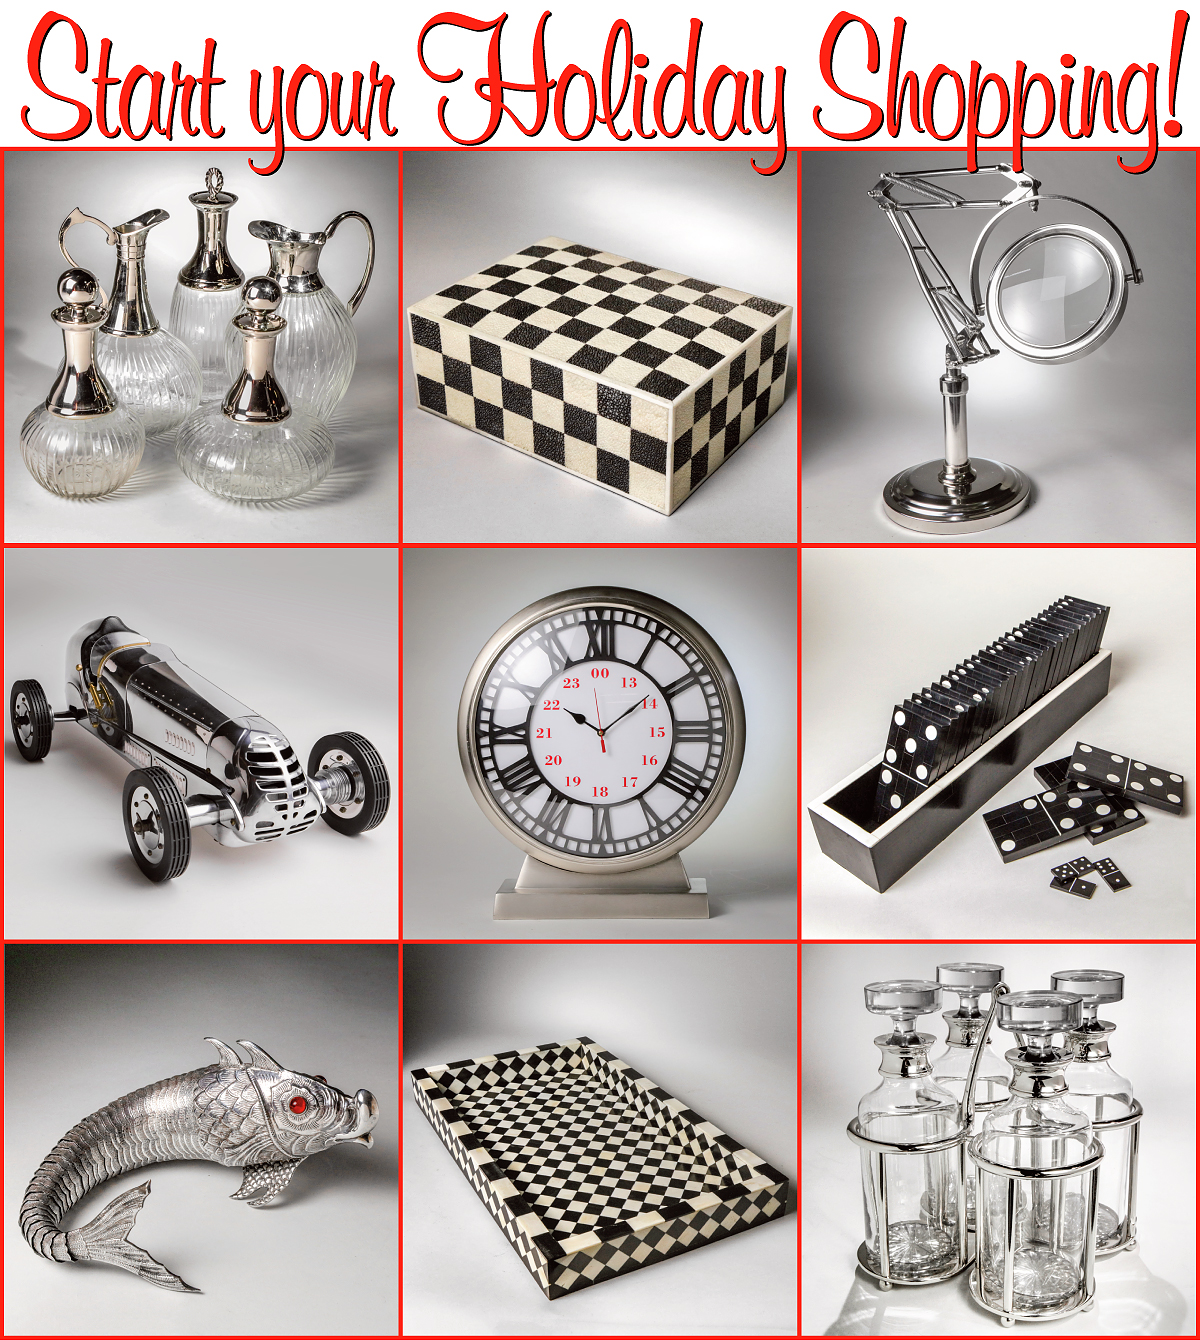 Start Your Holiday Shopping at LindaHorn.com